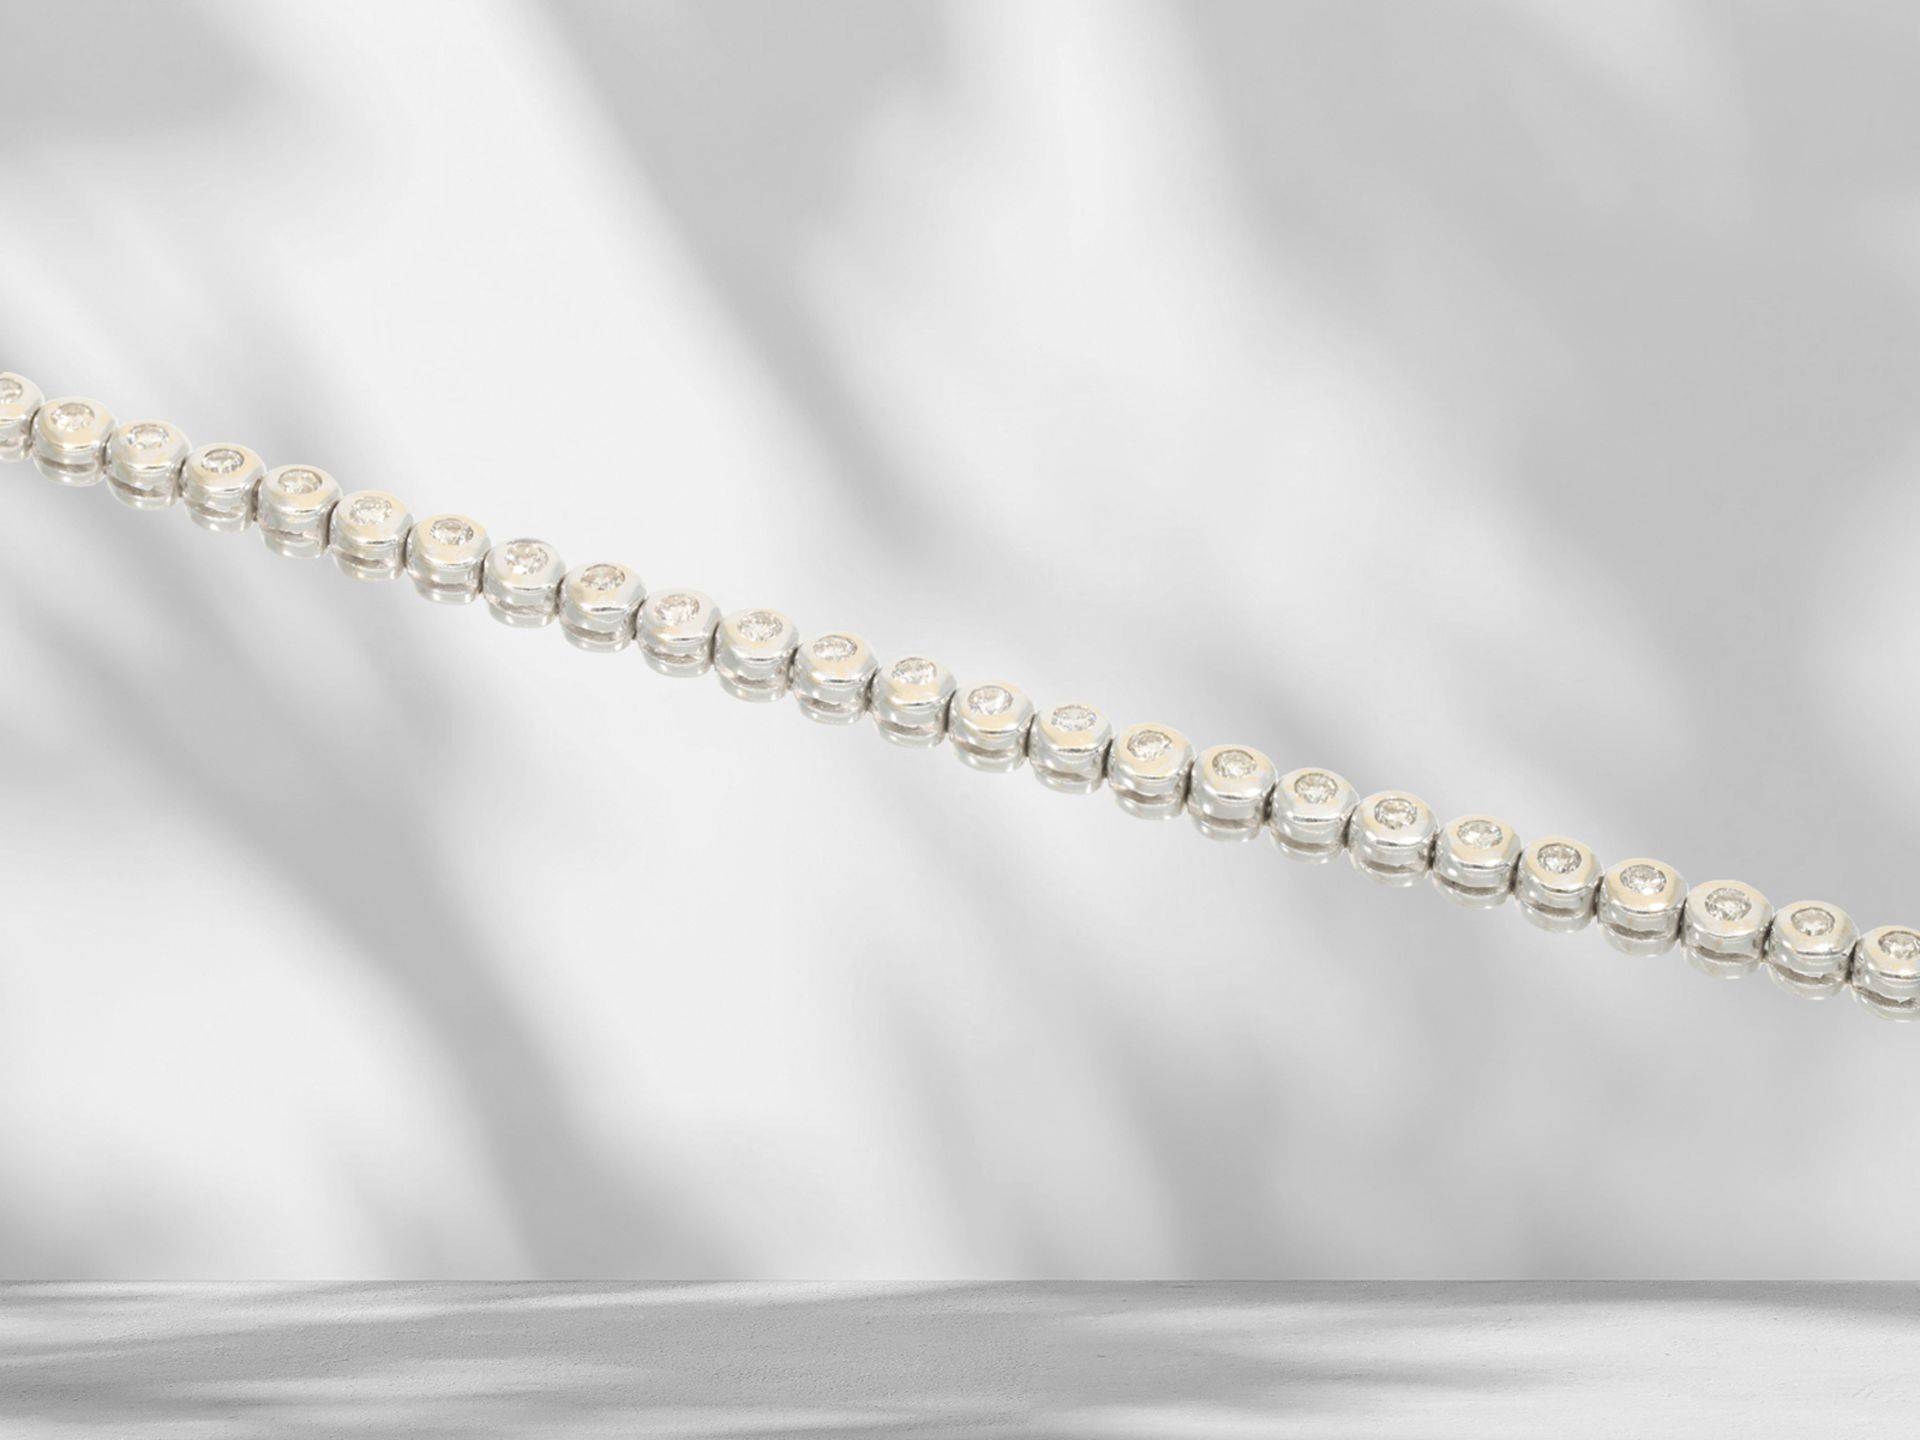 Bracelet: high-quality, handcrafted tennis bracelet with brilliant-cut diamonds, approx. 1.26ct - Image 3 of 4